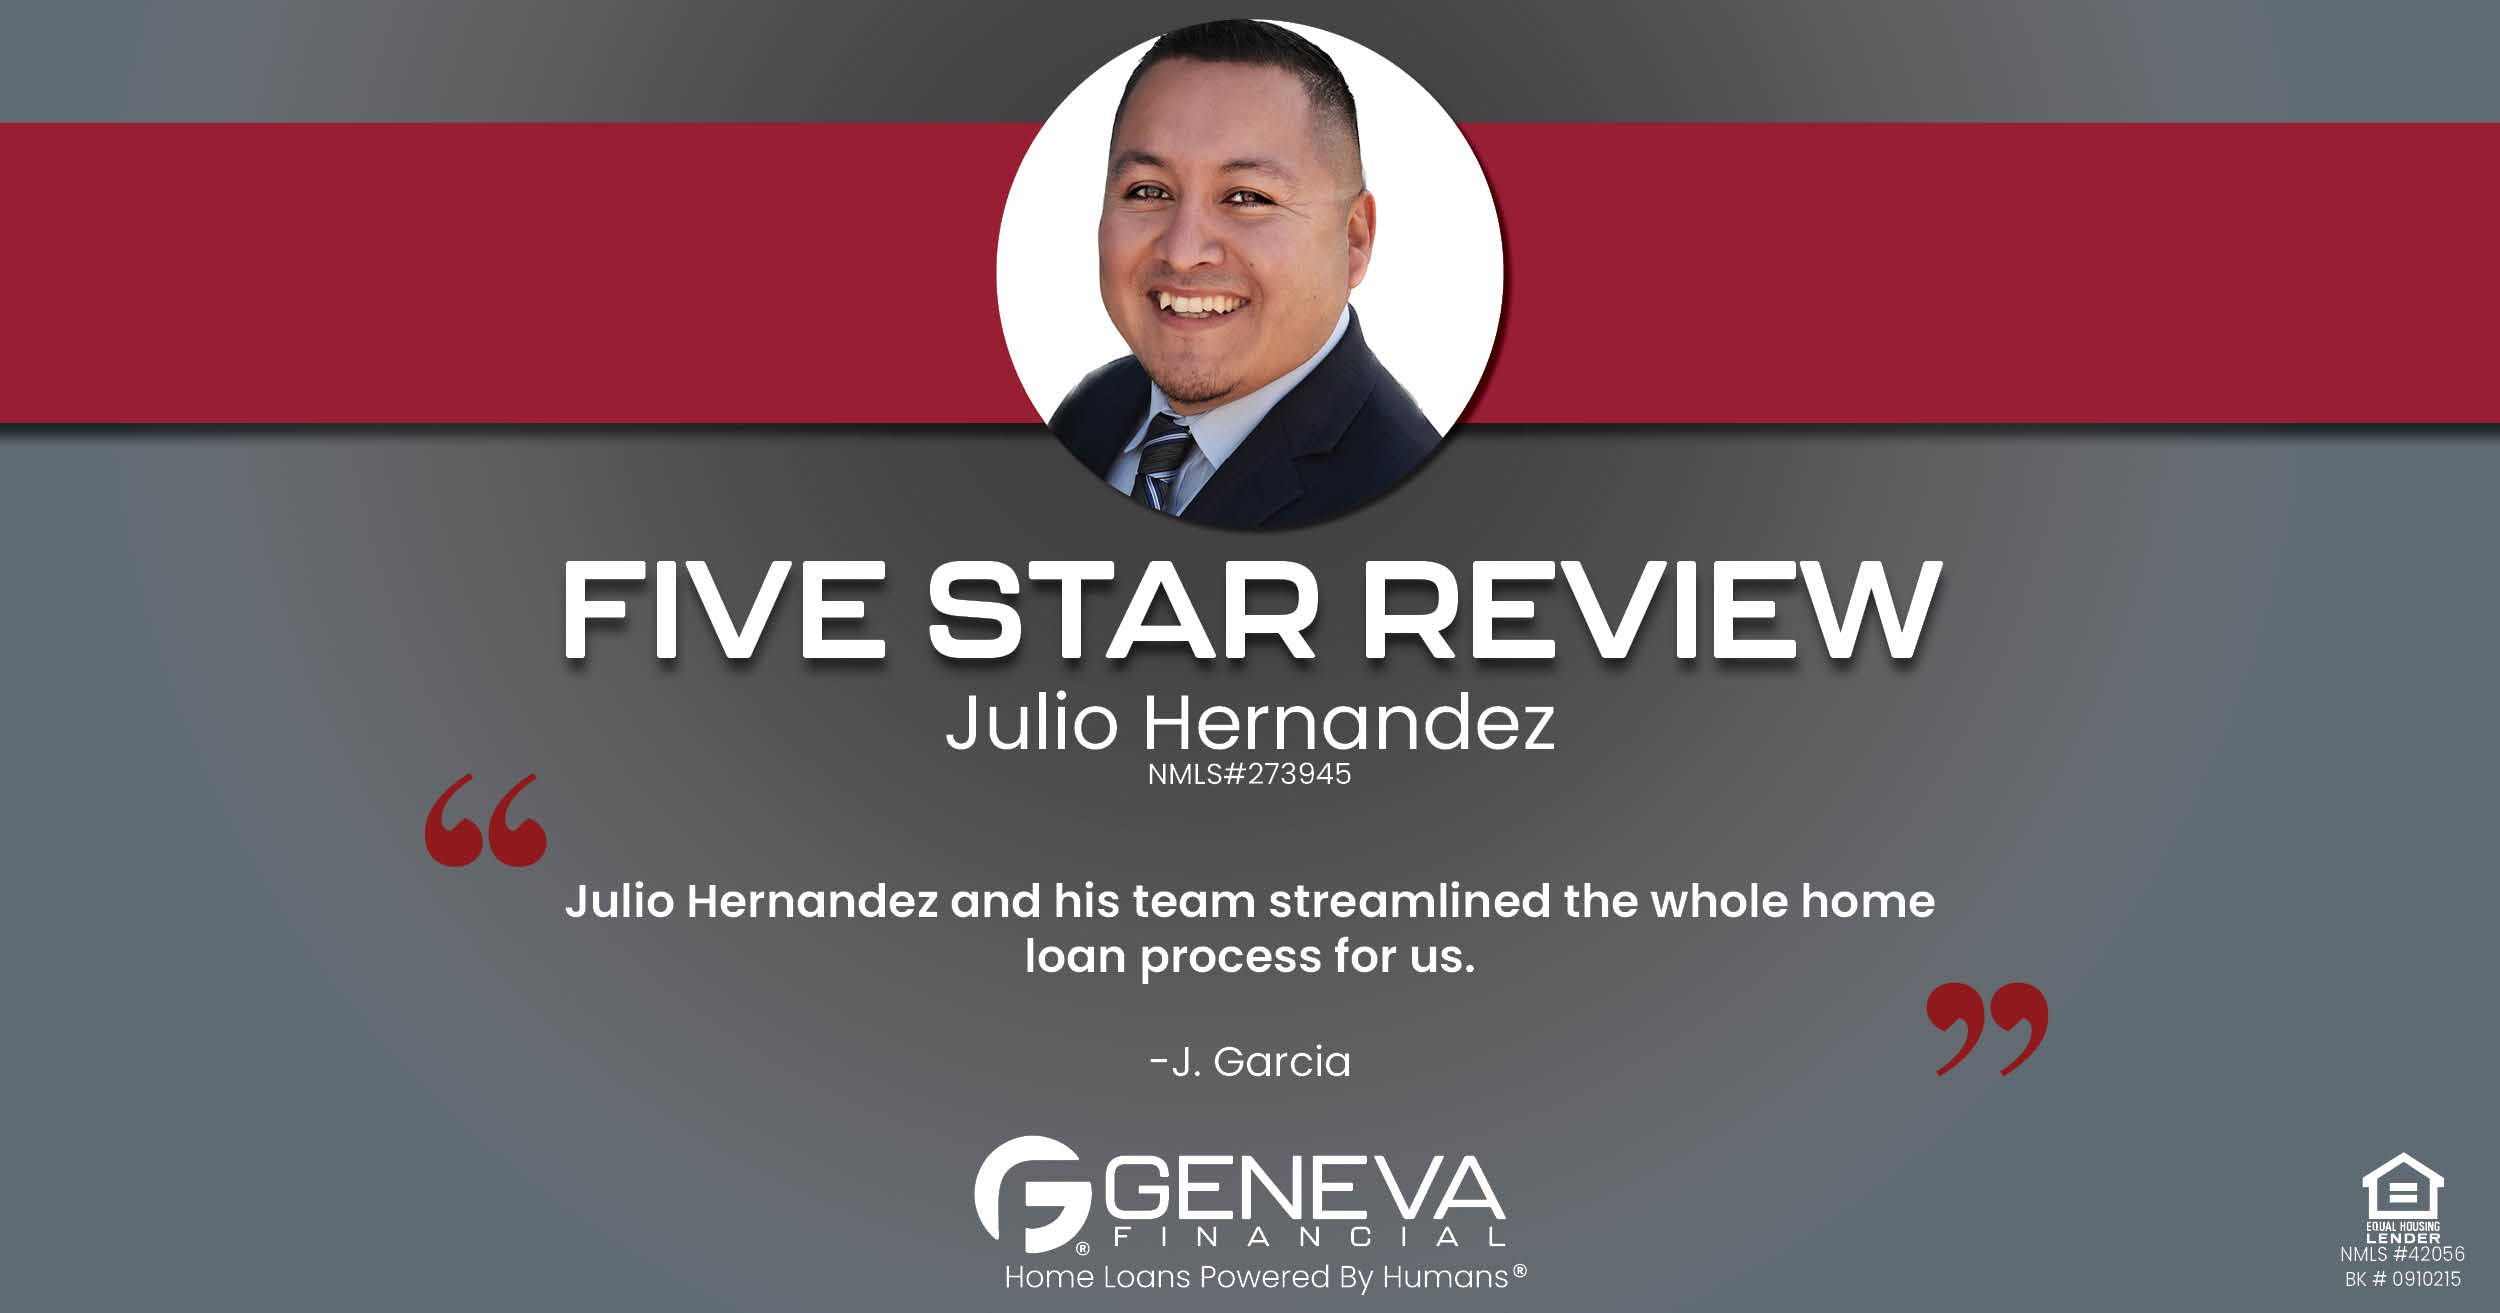 5 Star Review for Julio Hernandez, Licensed Mortgage Loan Officer with Geneva Financial, California – Home Loans Powered by Humans®.